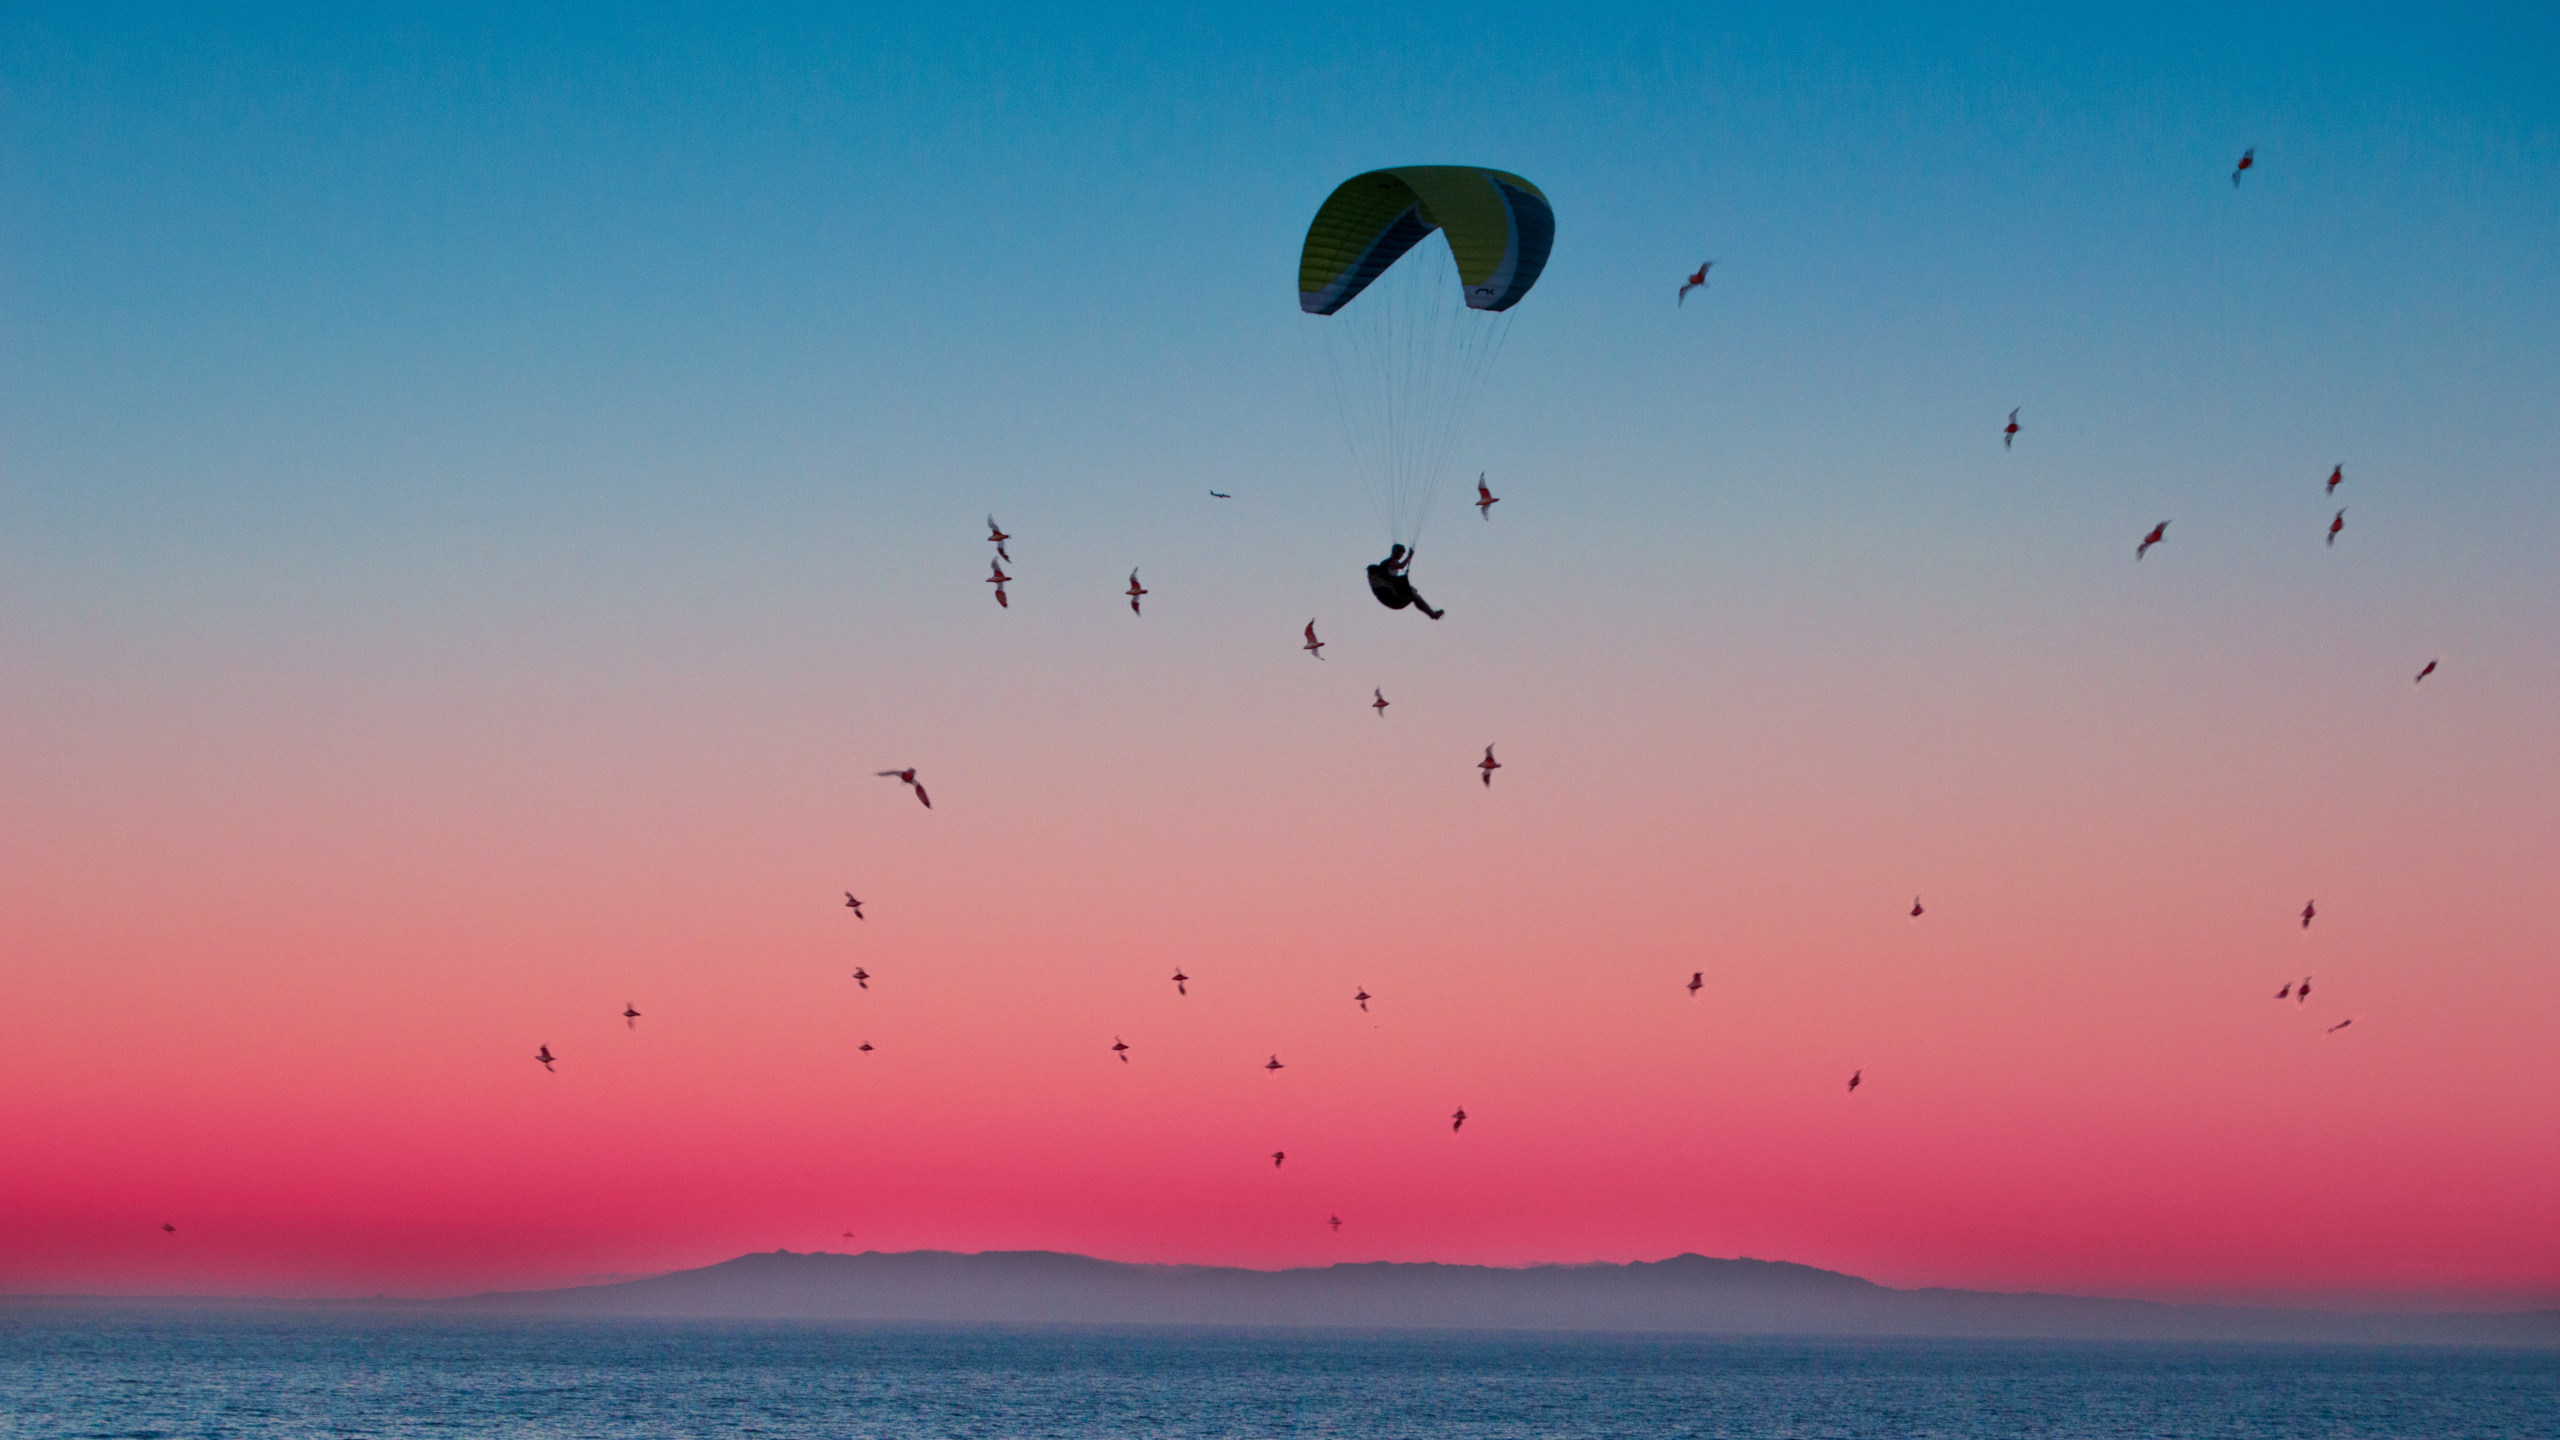 Birds Flying Over The Sea During Sunset. Wallpaper in 2560x1440 Resolution